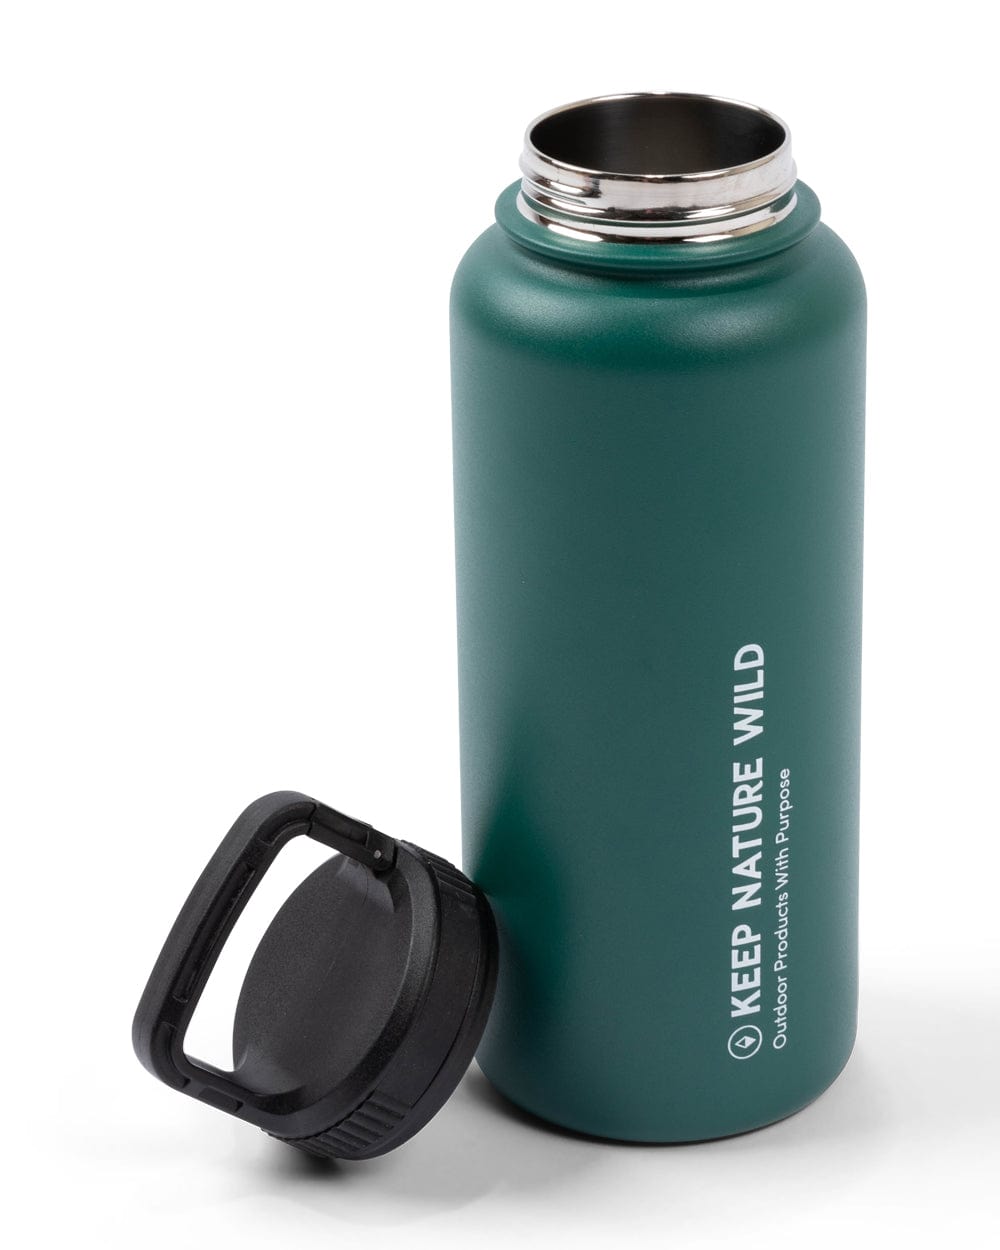 Stanley Stainless Steel Water Bottle - 32oz - Hike & Camp